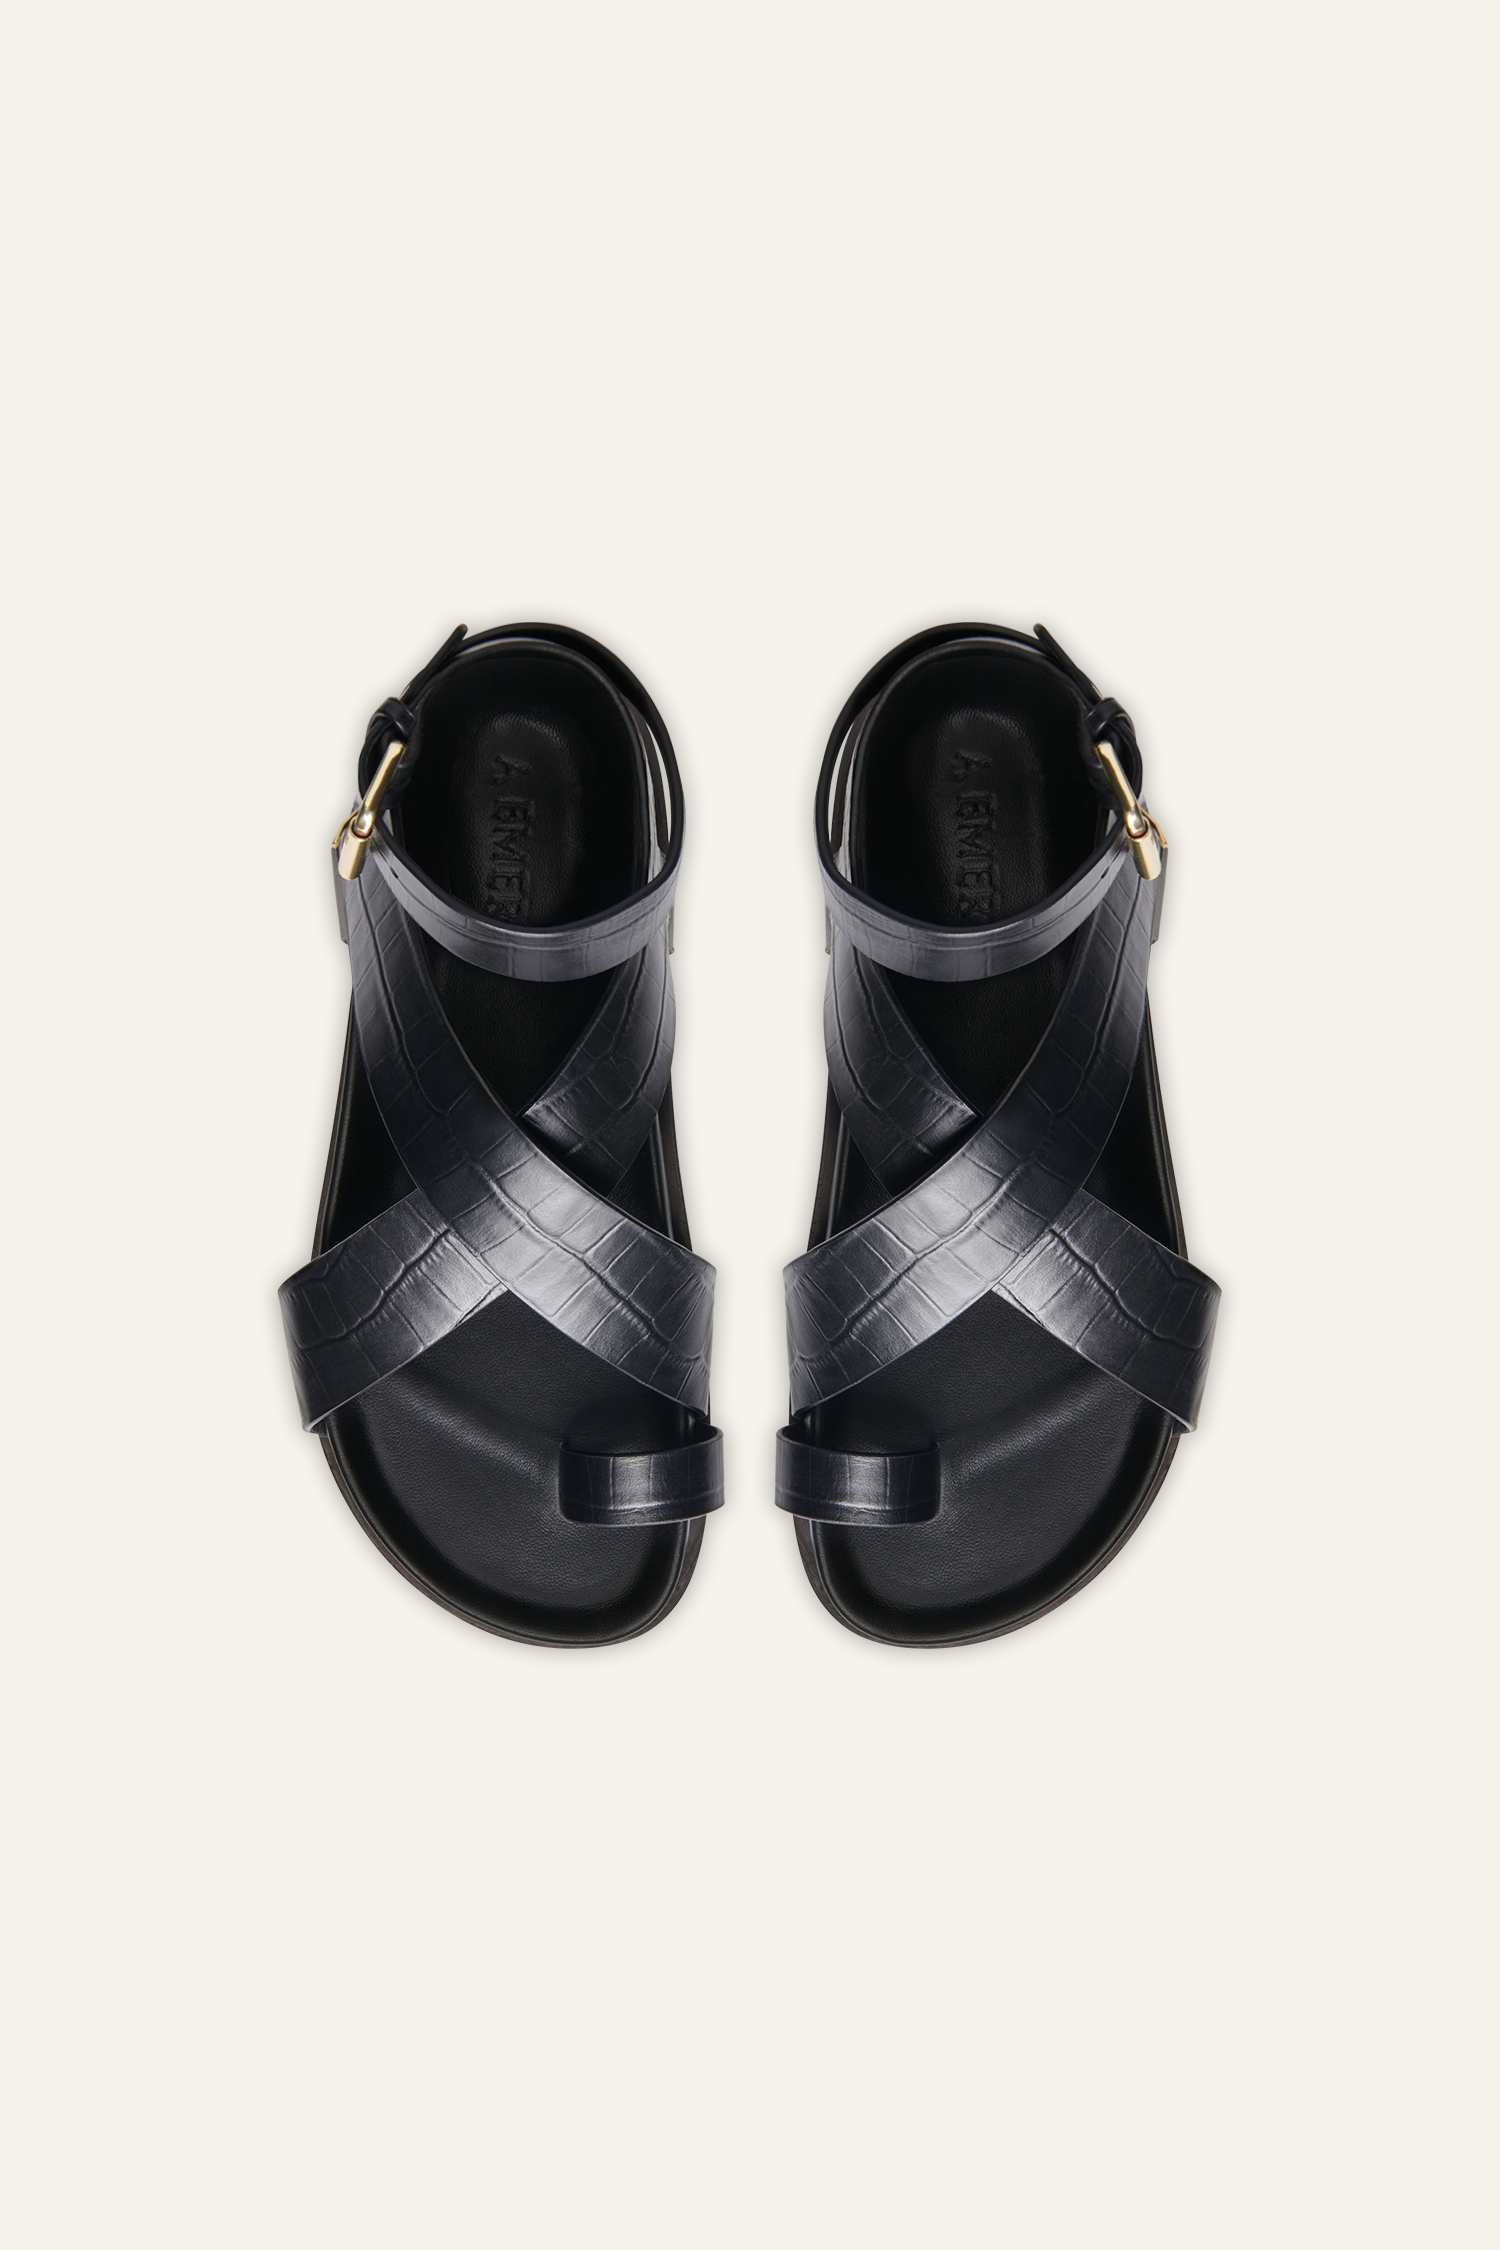 A.Emery Jalen Sandal in Black Croc from The New Trend 